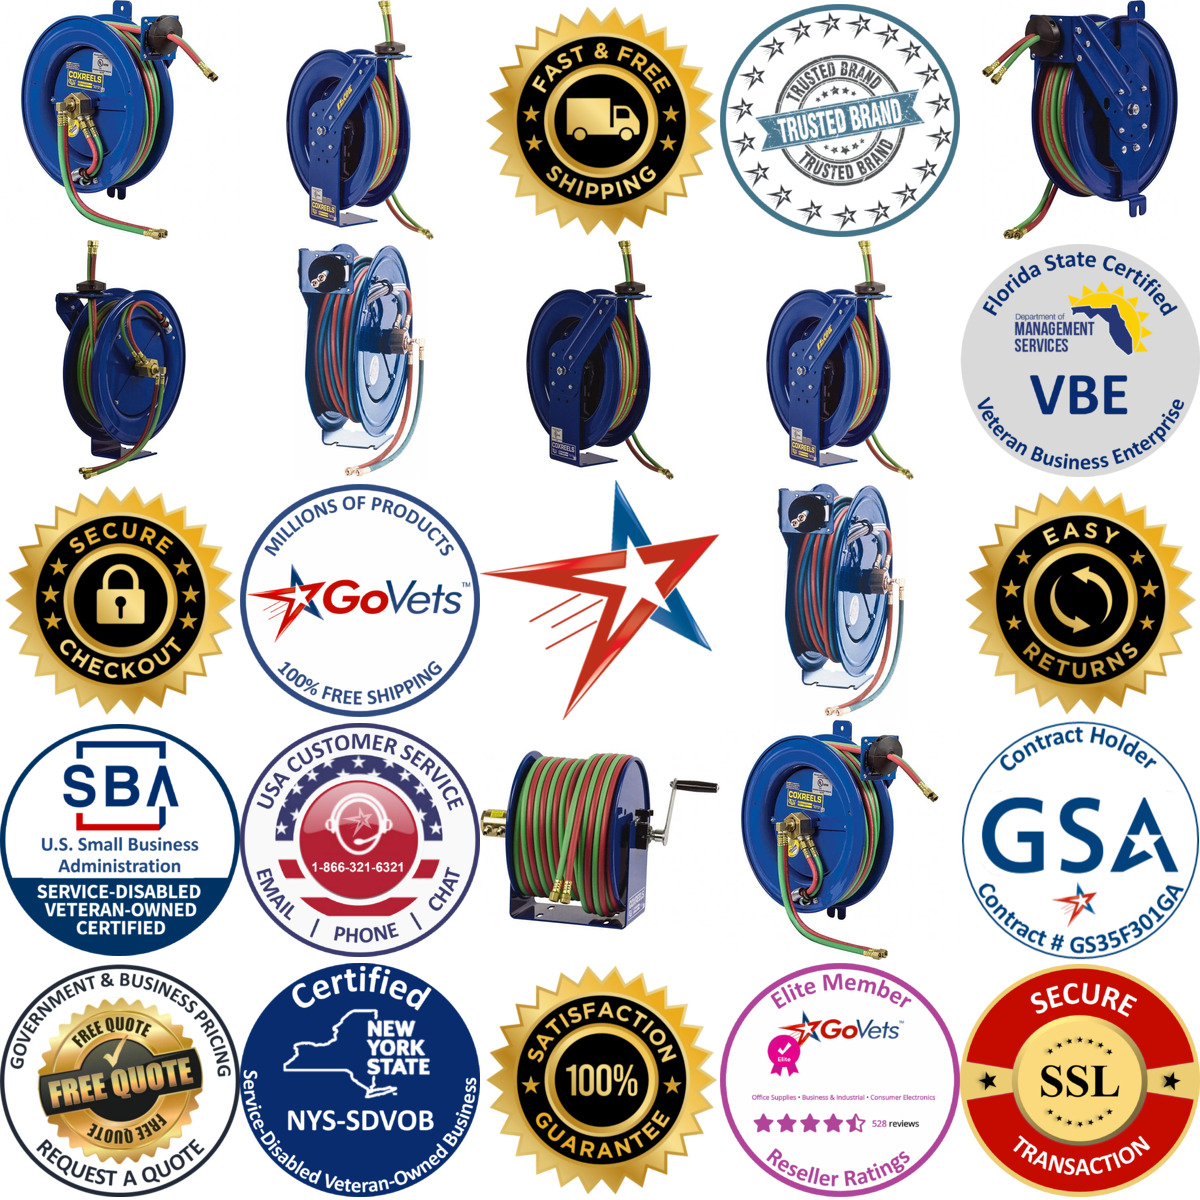 A selection of Coxreels products on GoVets